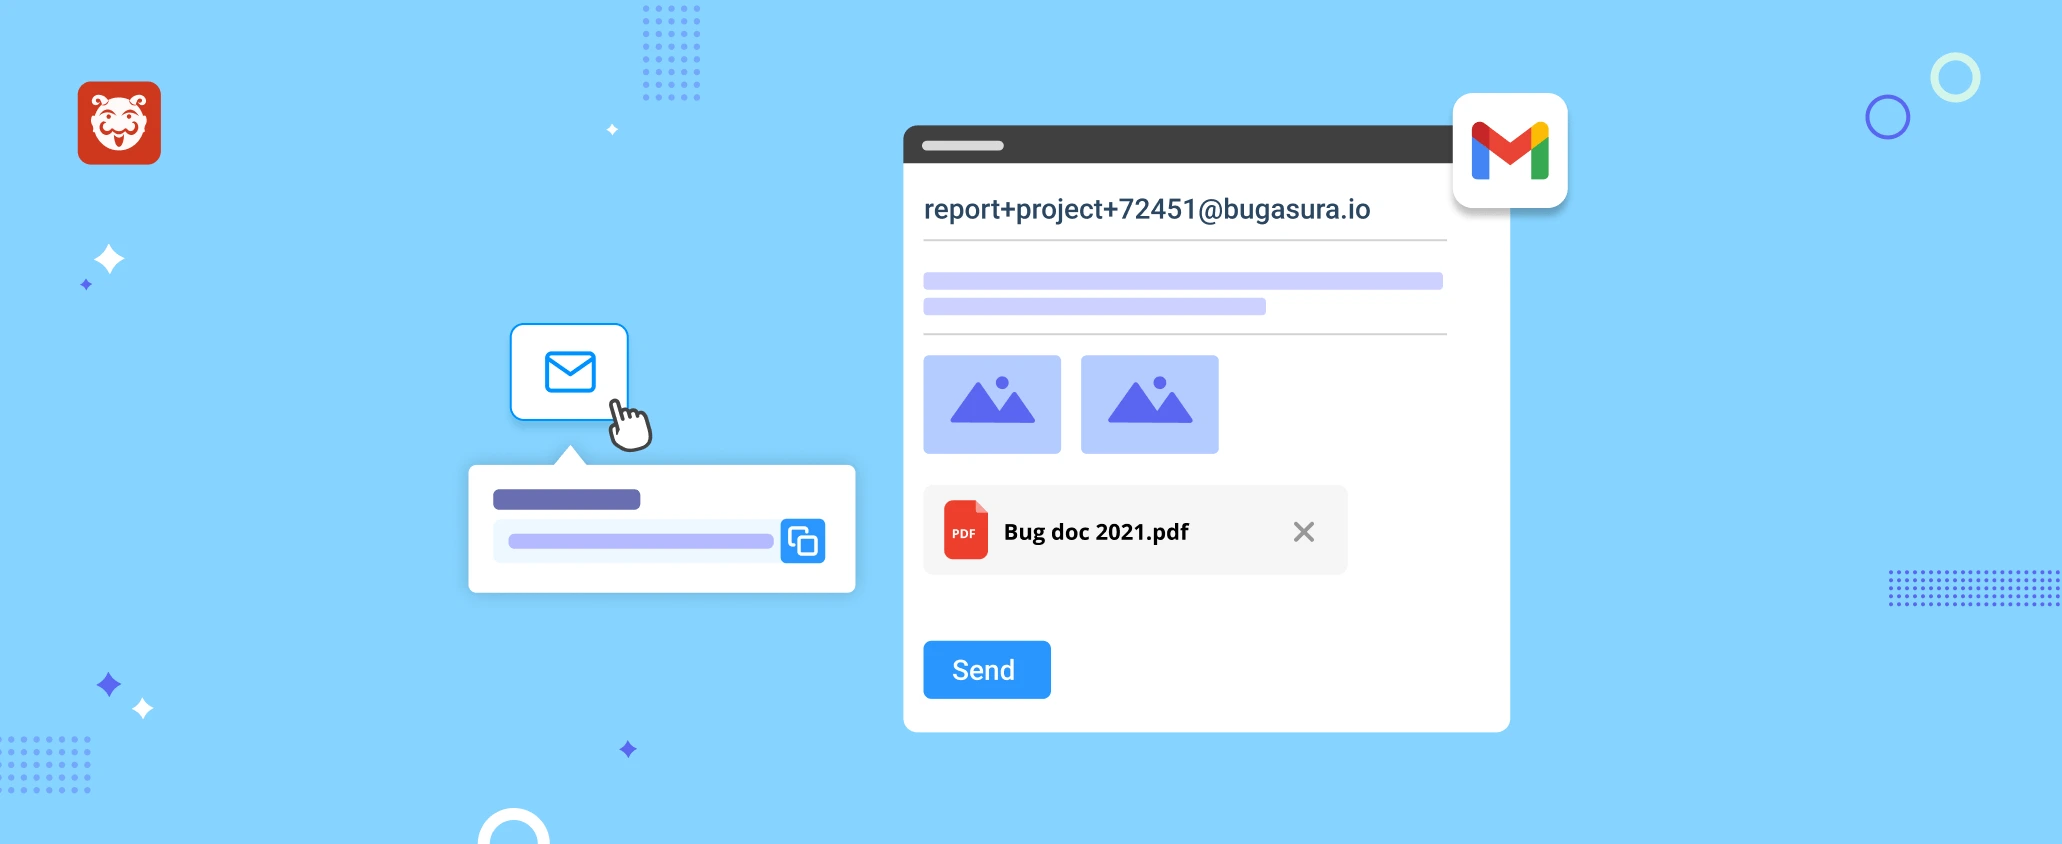 Log Your Bugs through Email!